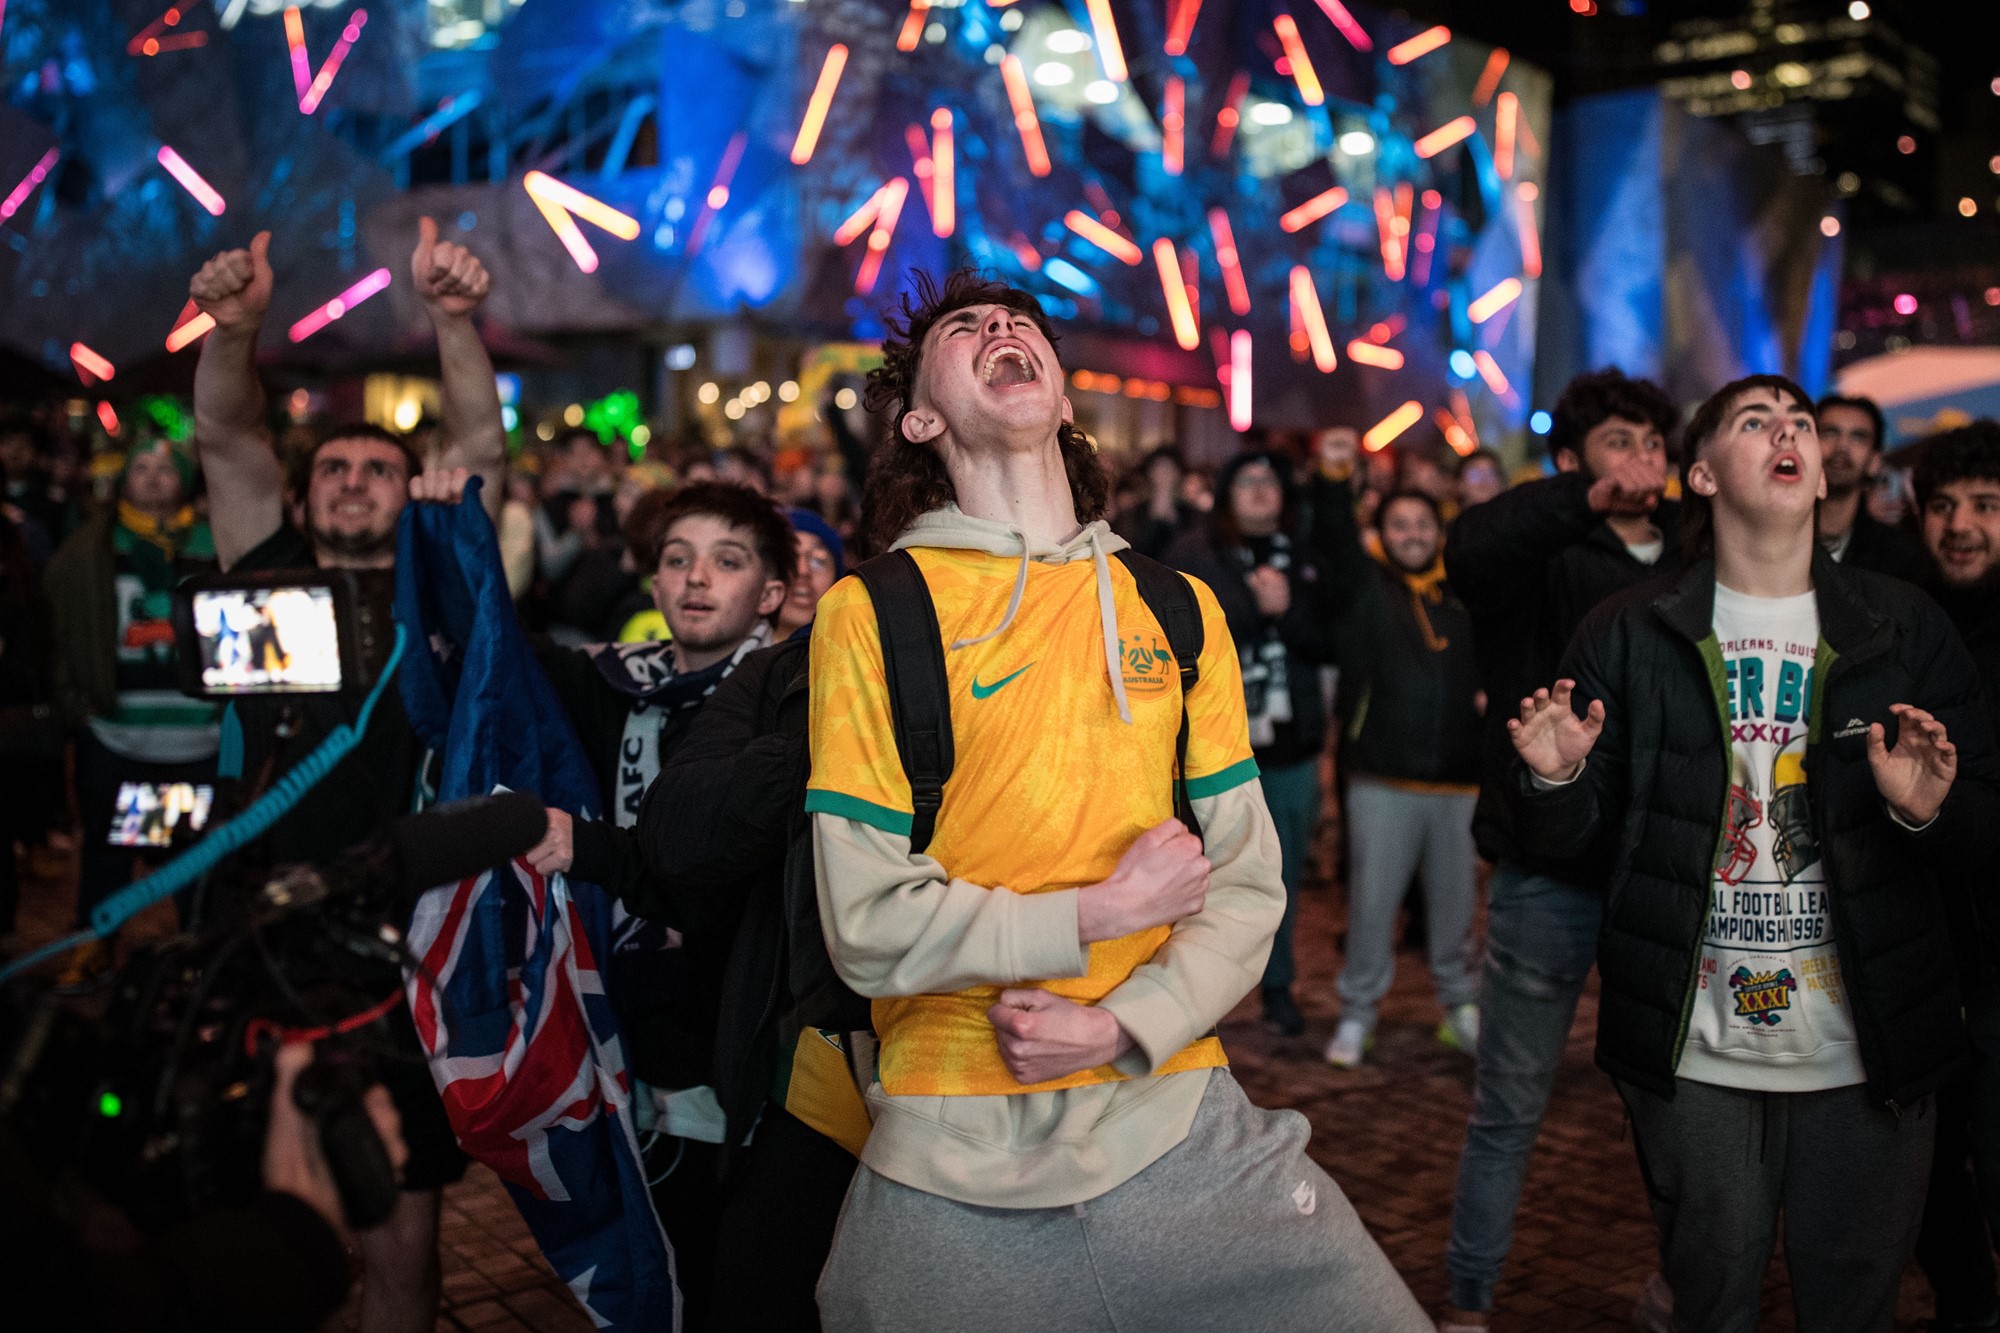 A young man in a Matildas jersey screams in the middle of the crowd.